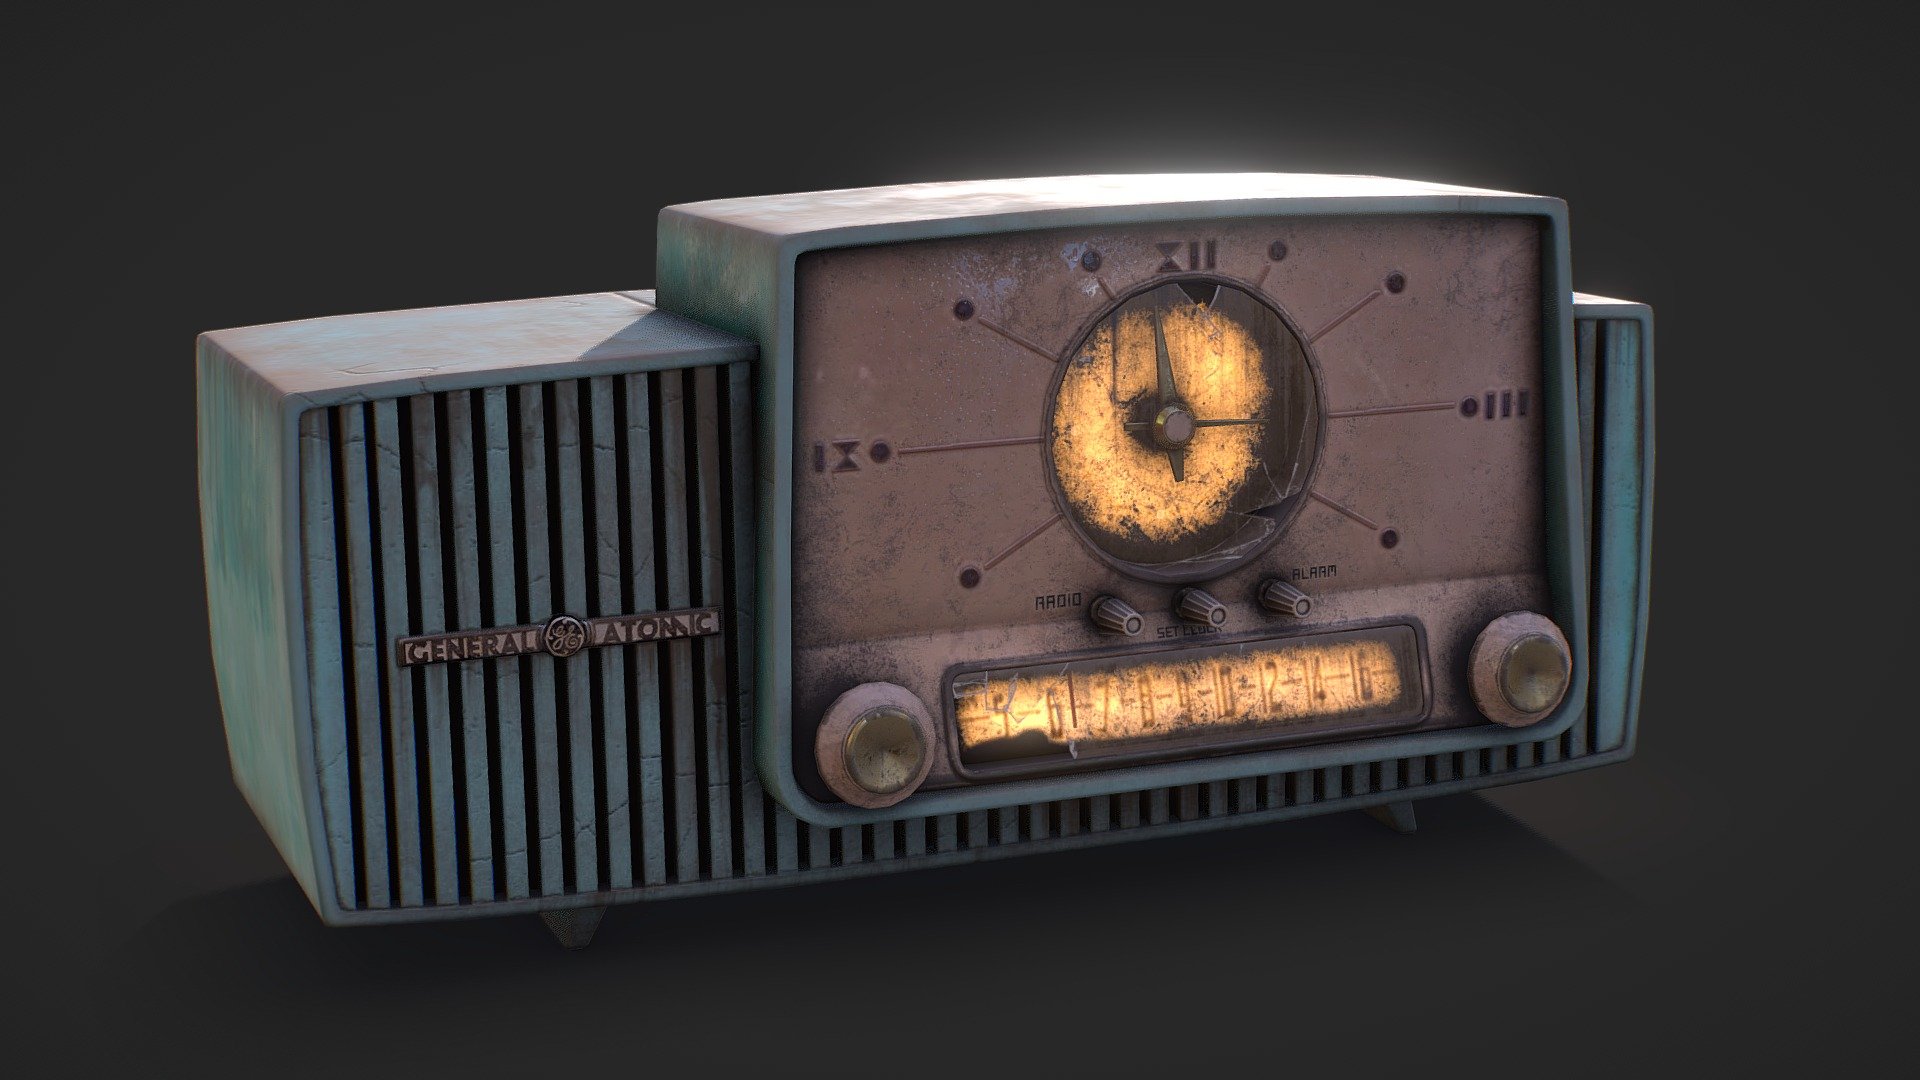 A radio based on the General Electric Model 915 from the atomic age. Created for a Fallout mod project 3d model